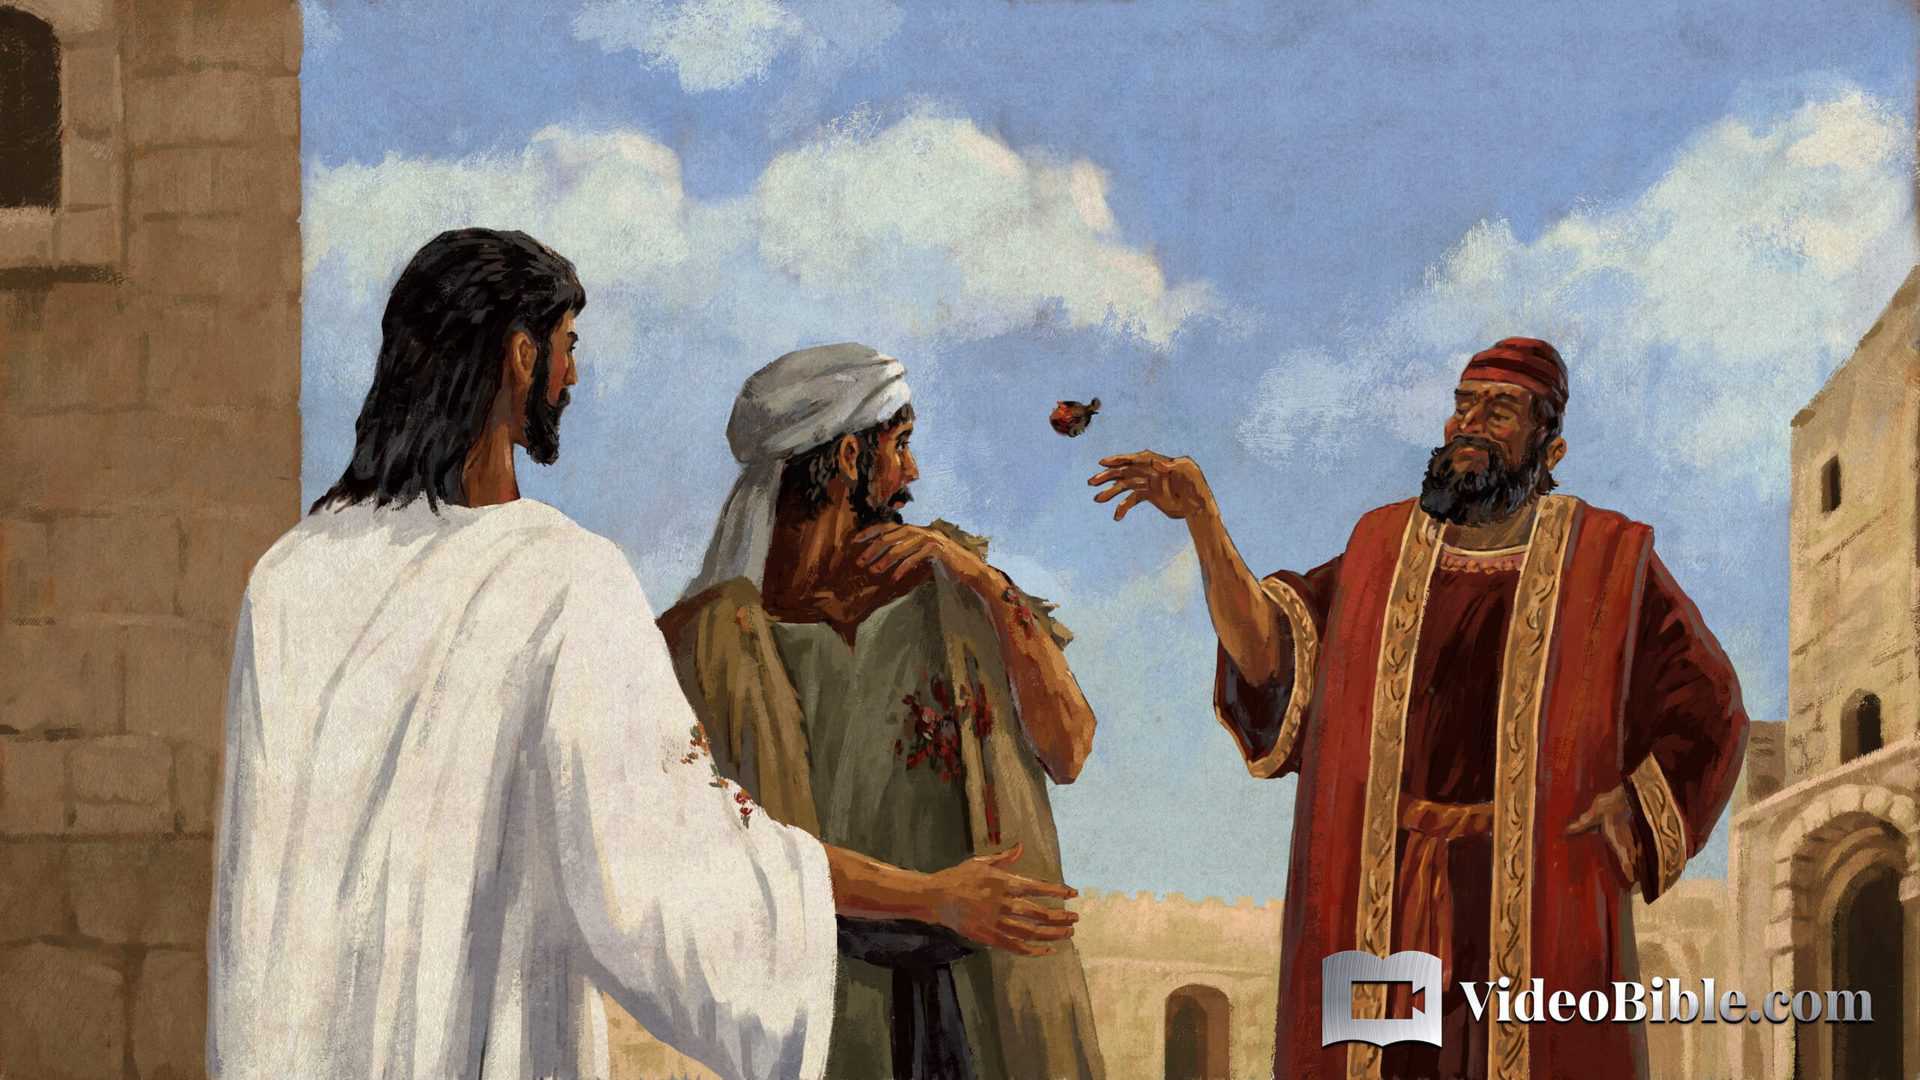 rich man being unkind to poor man as Jesus watches